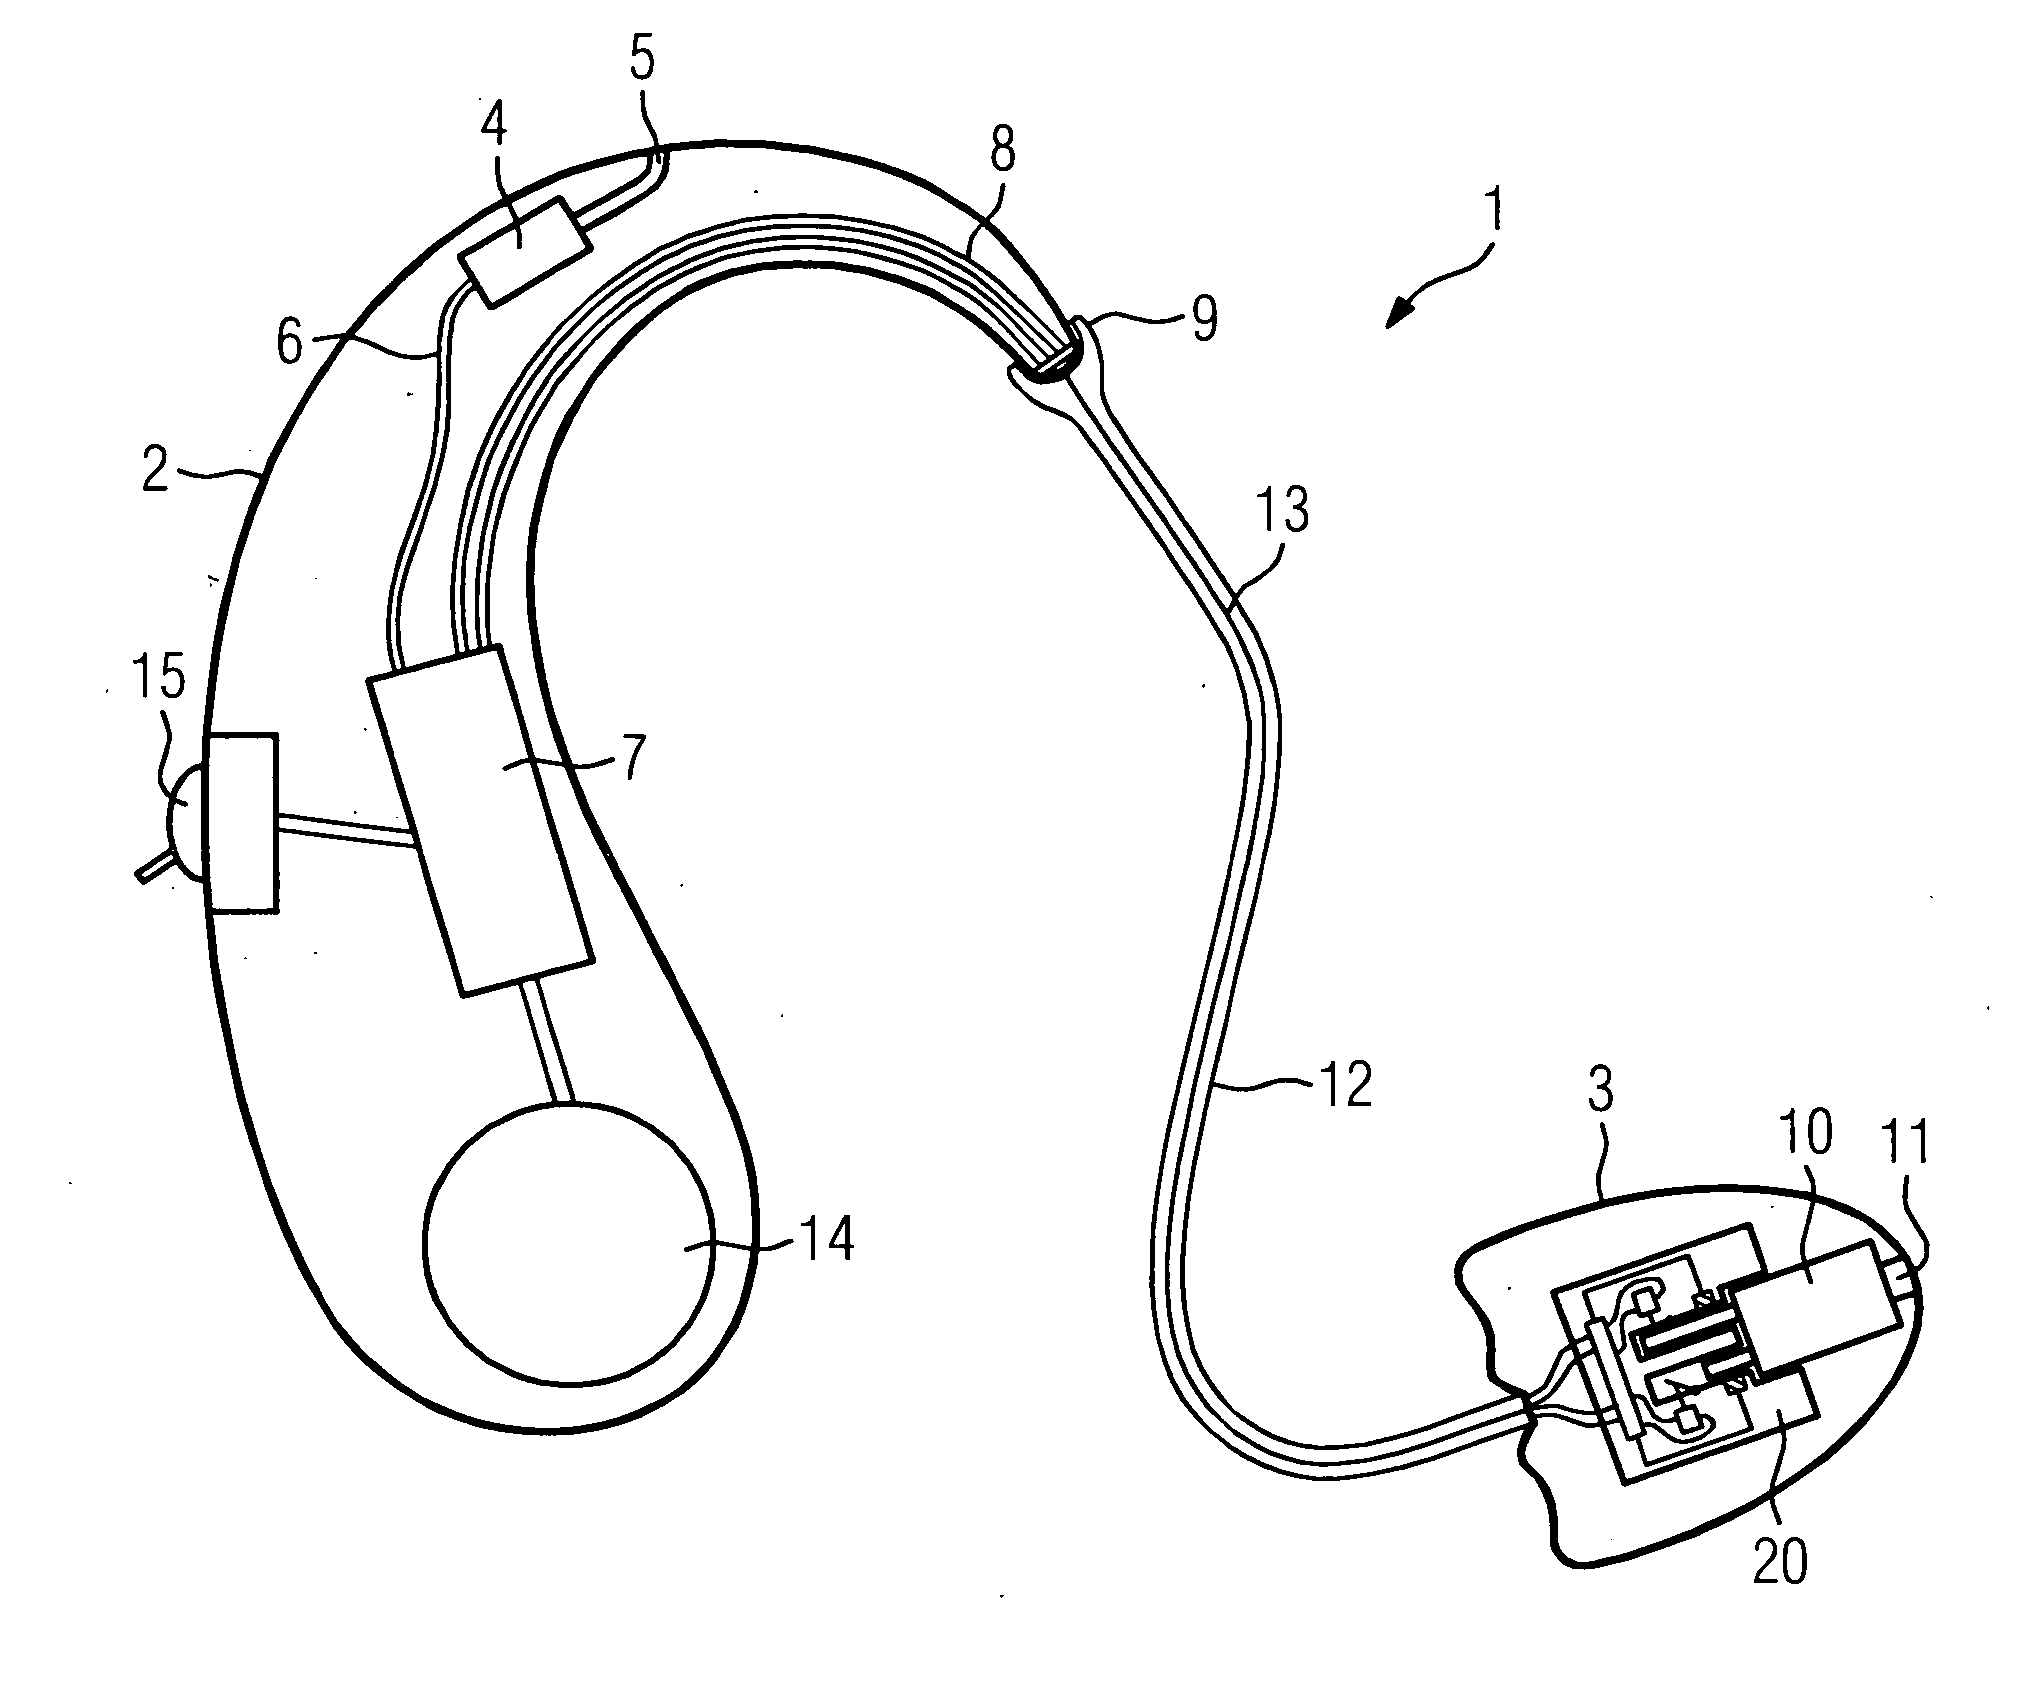 Automatic identification of receiver type in hearing aid devices